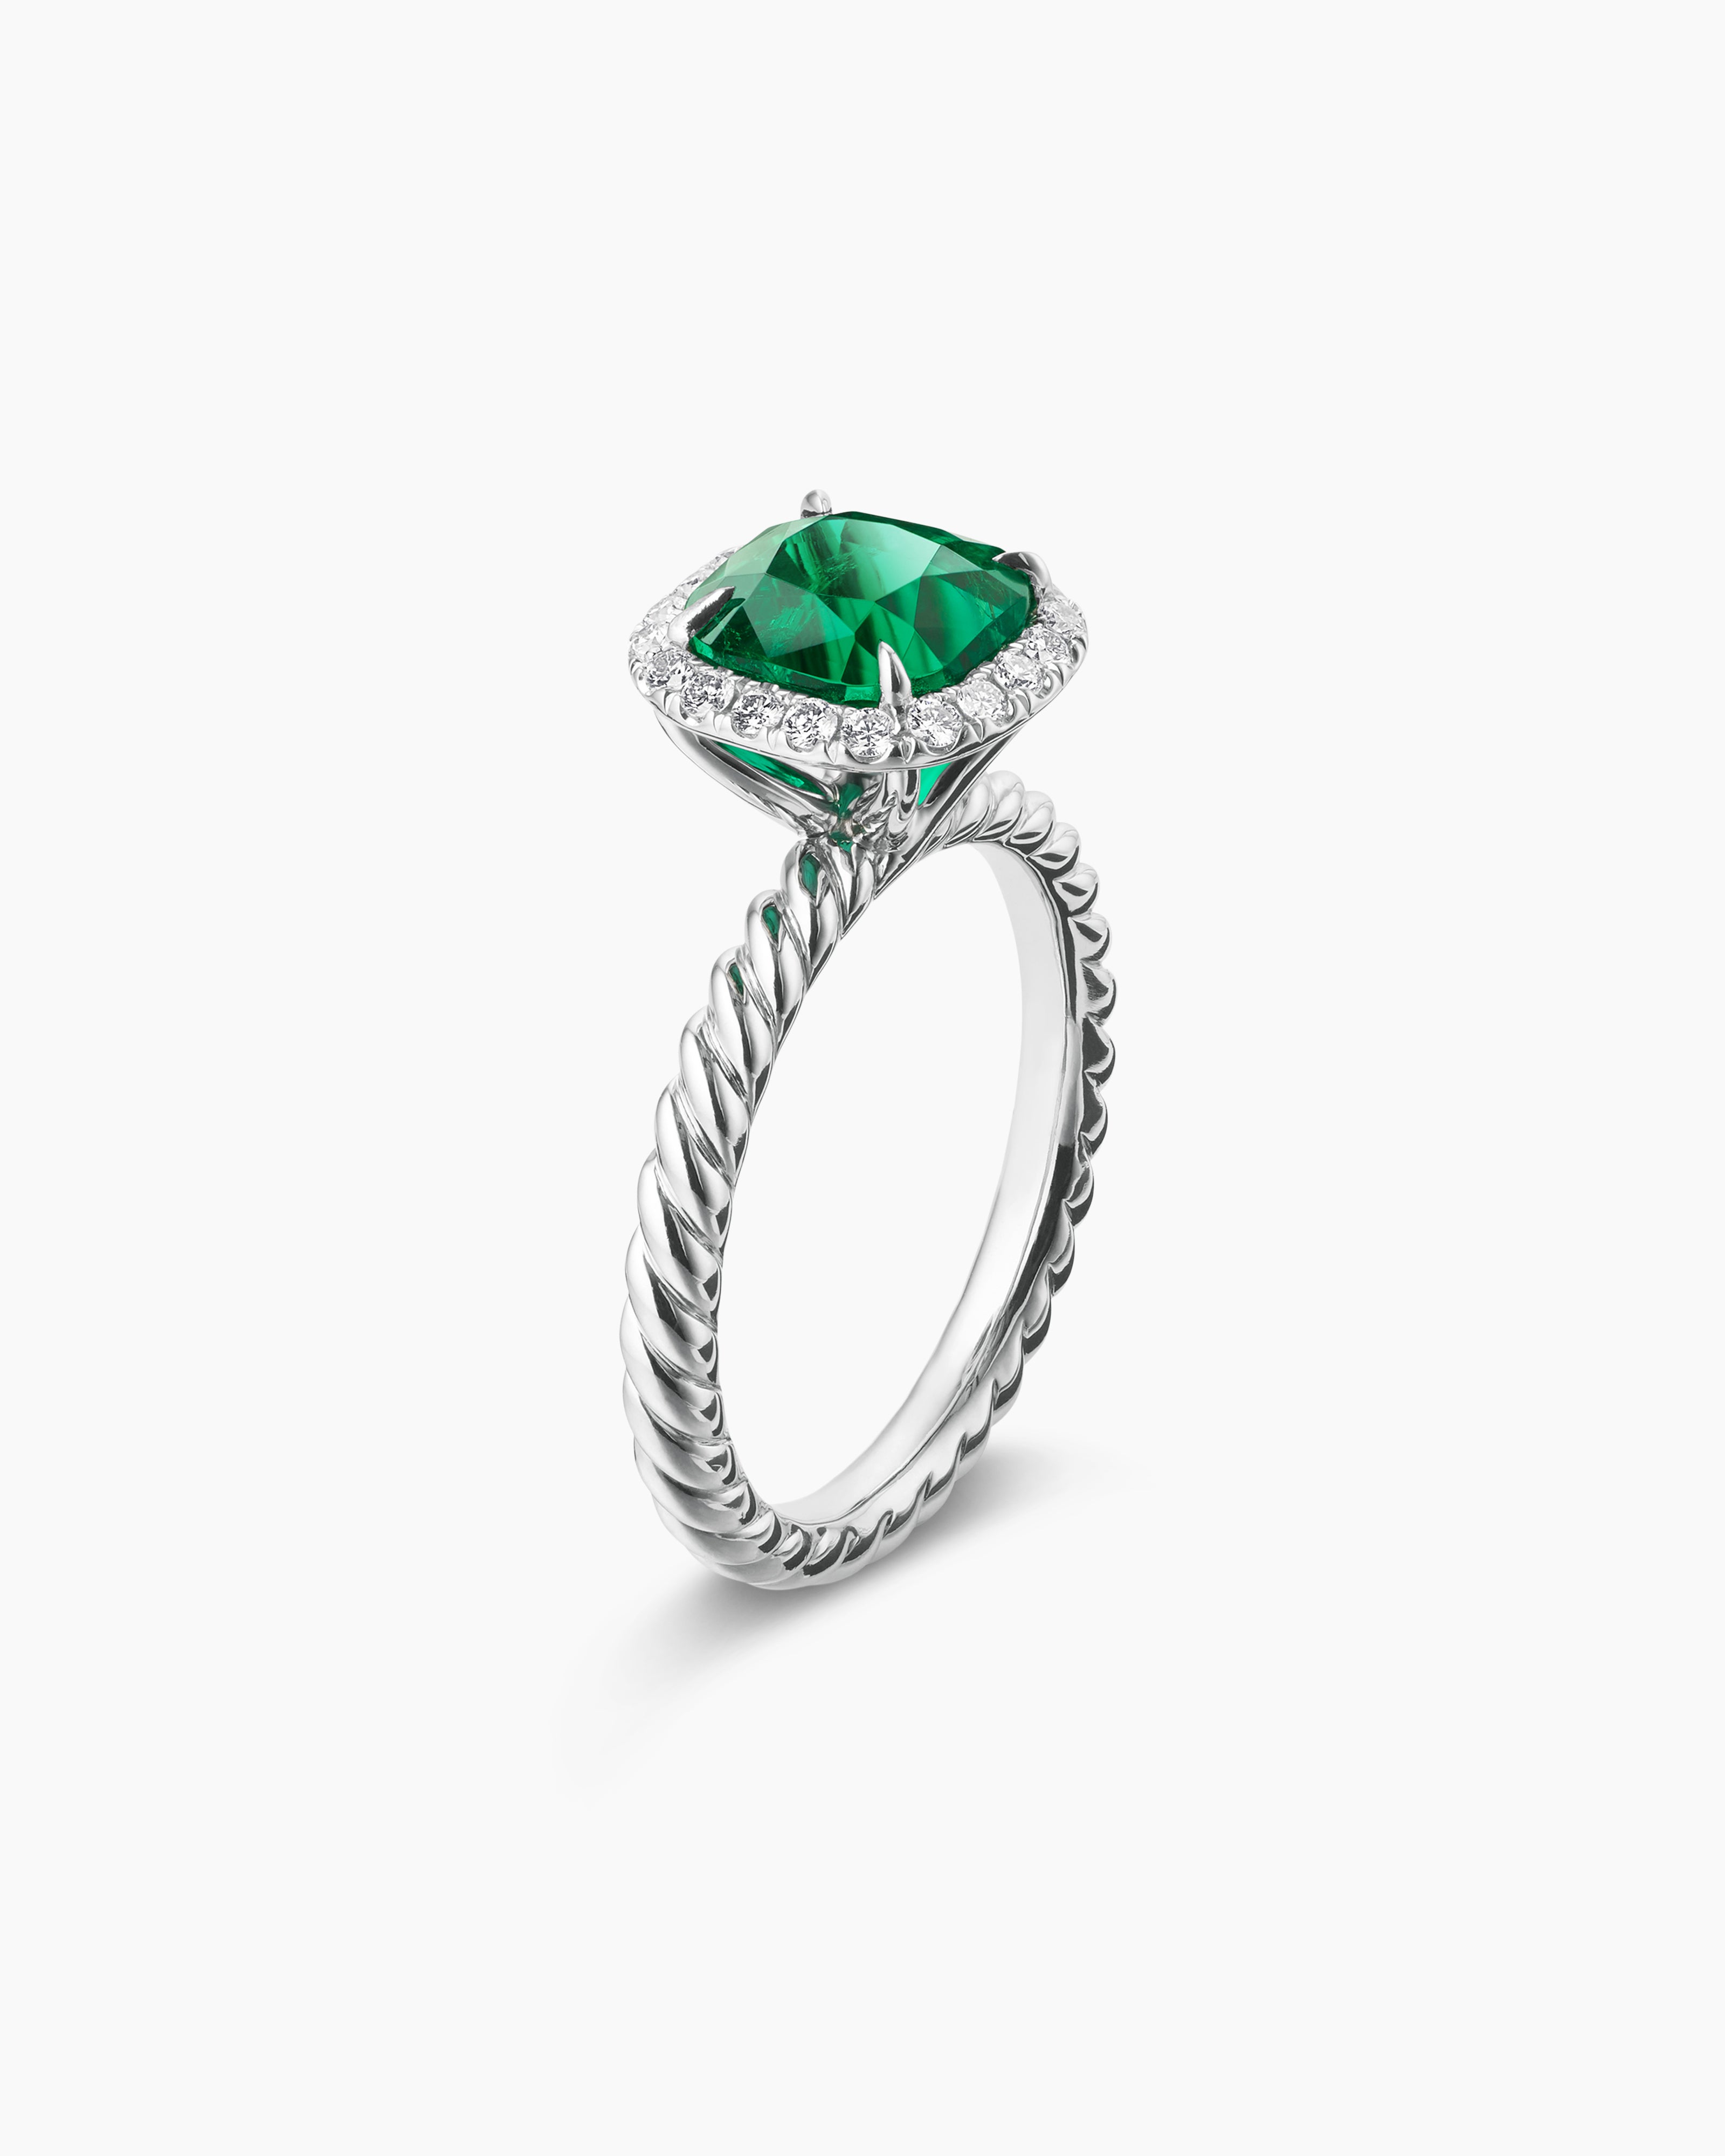 18K White Gold and Platinum Estate Kat Florence Emerald Ring Size8  w/Diams=.82ctw D I-F 8.2dwt | Monmouth County's #1 Fine Jeweler